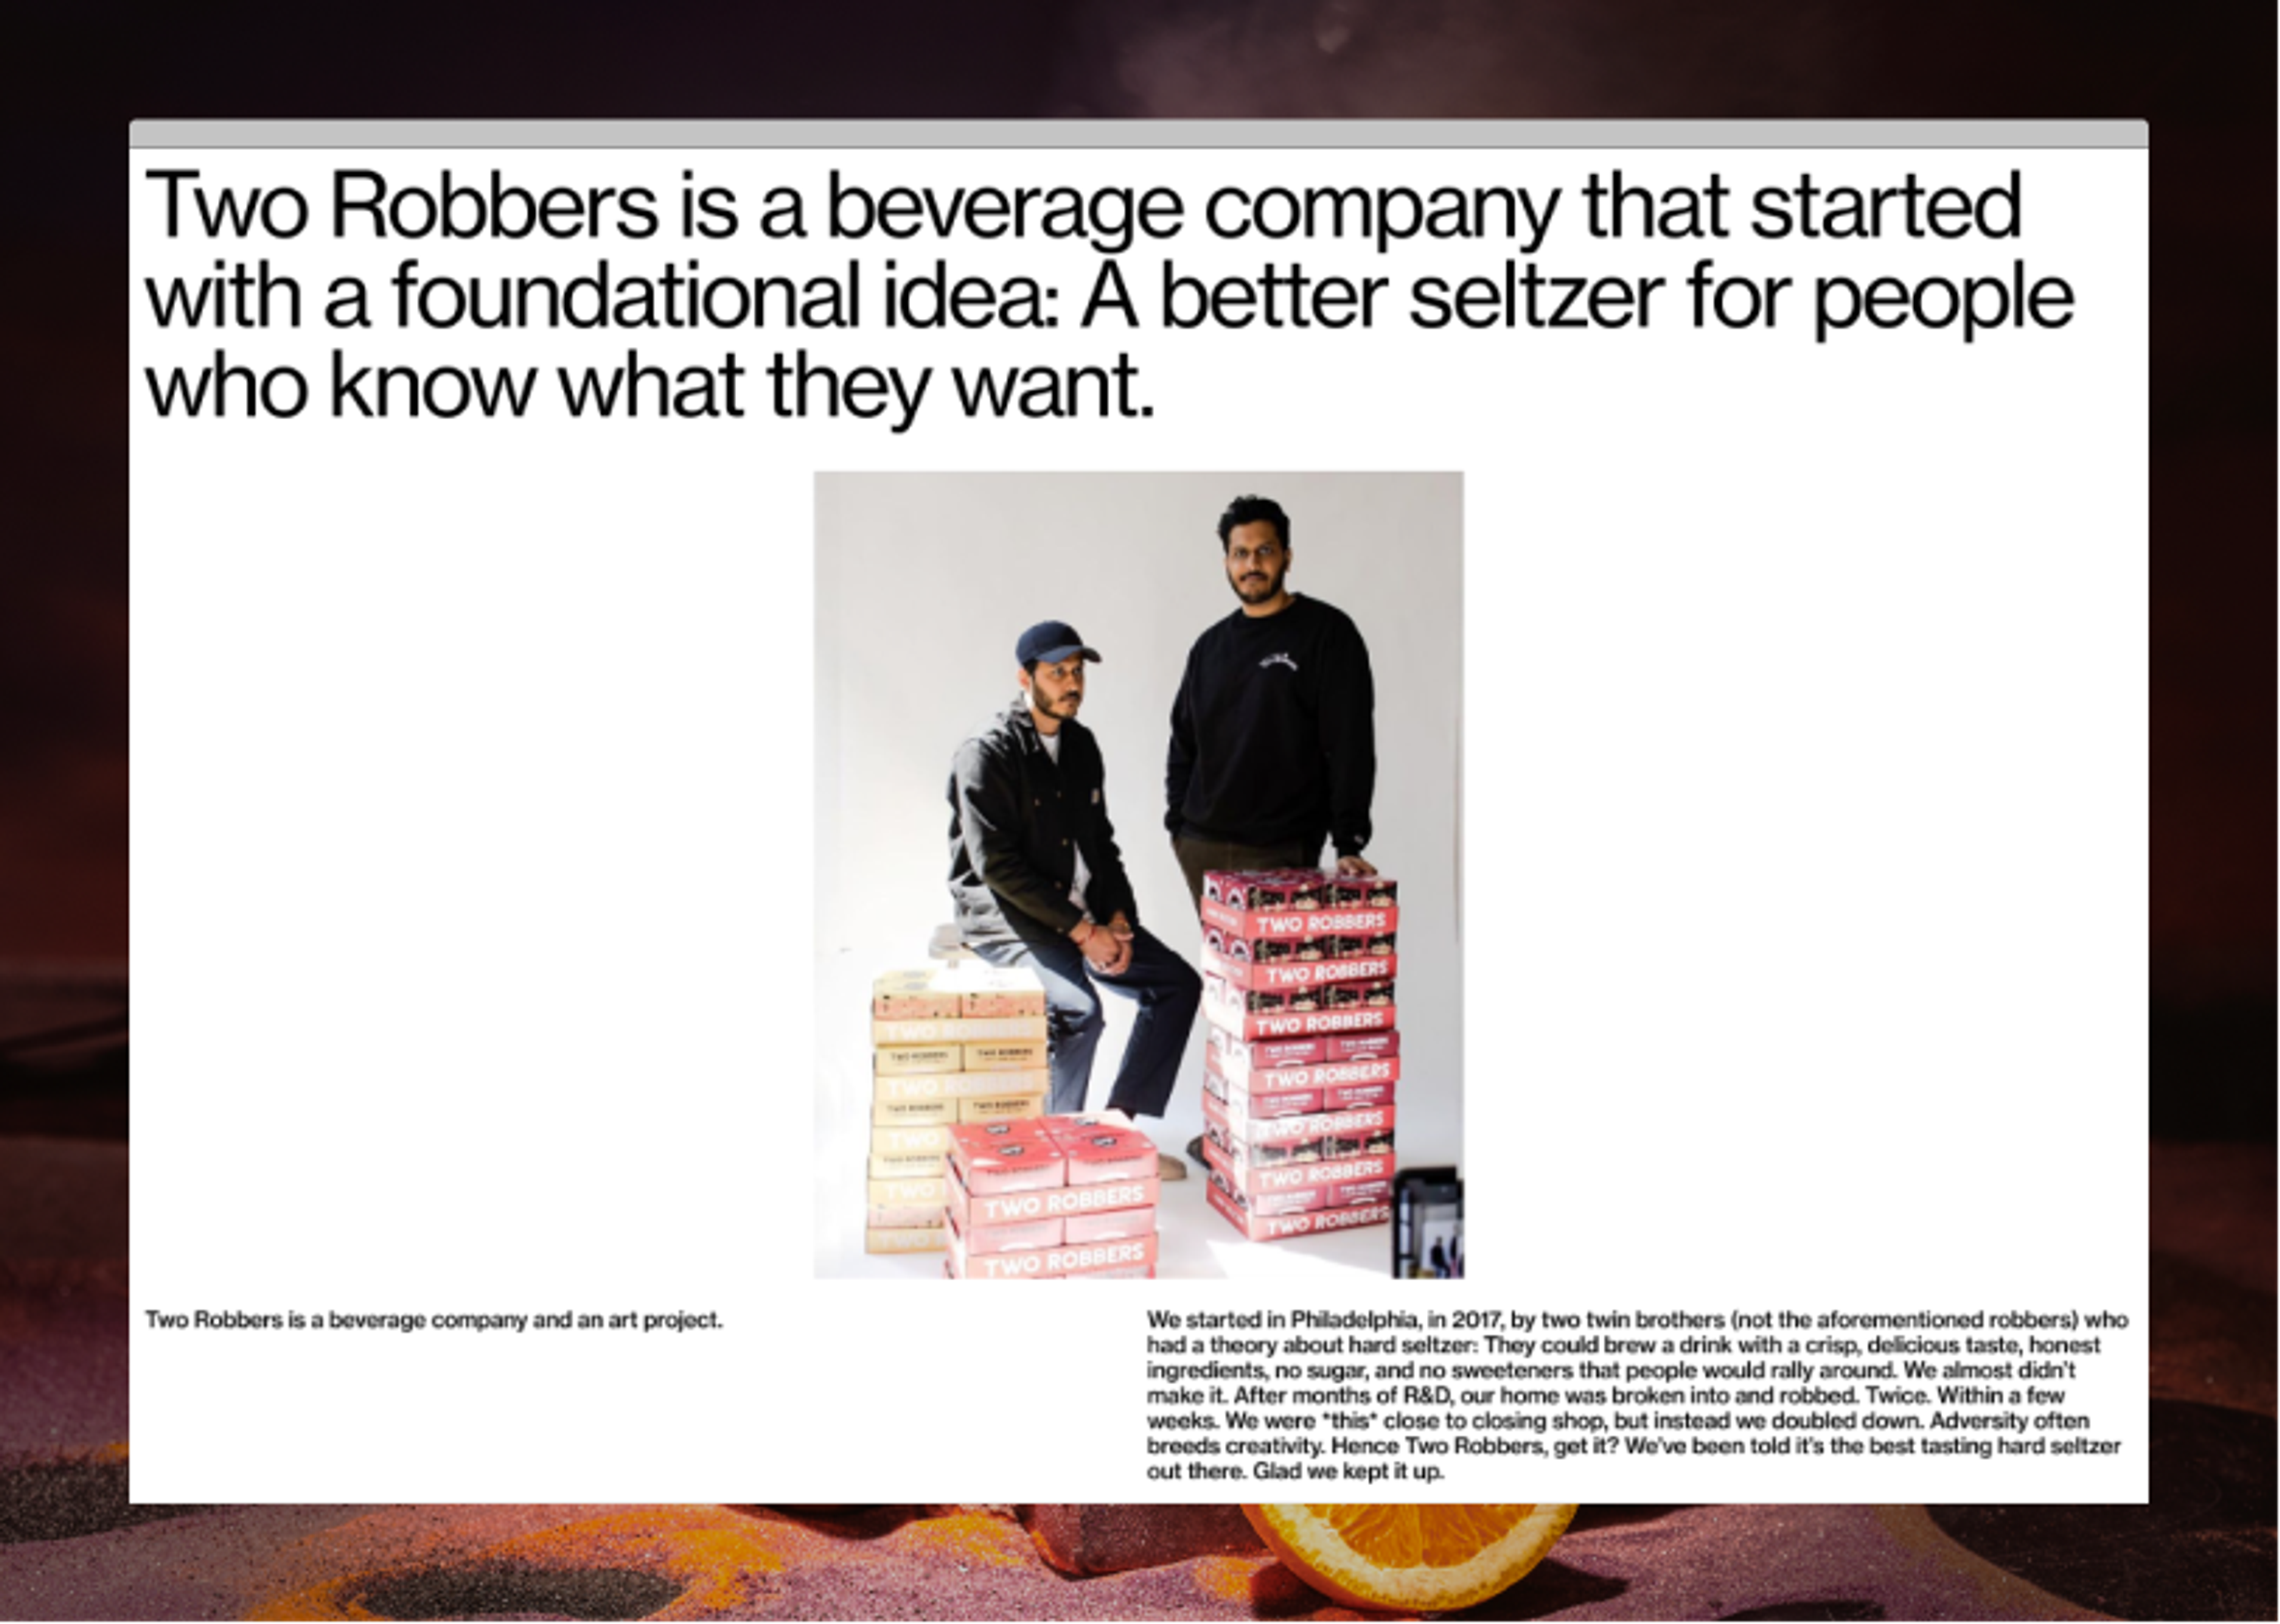 two robbers about page stating "Two Robbers is a beverage company that started with a foundational idea: A better seltzer for people who know what they want"